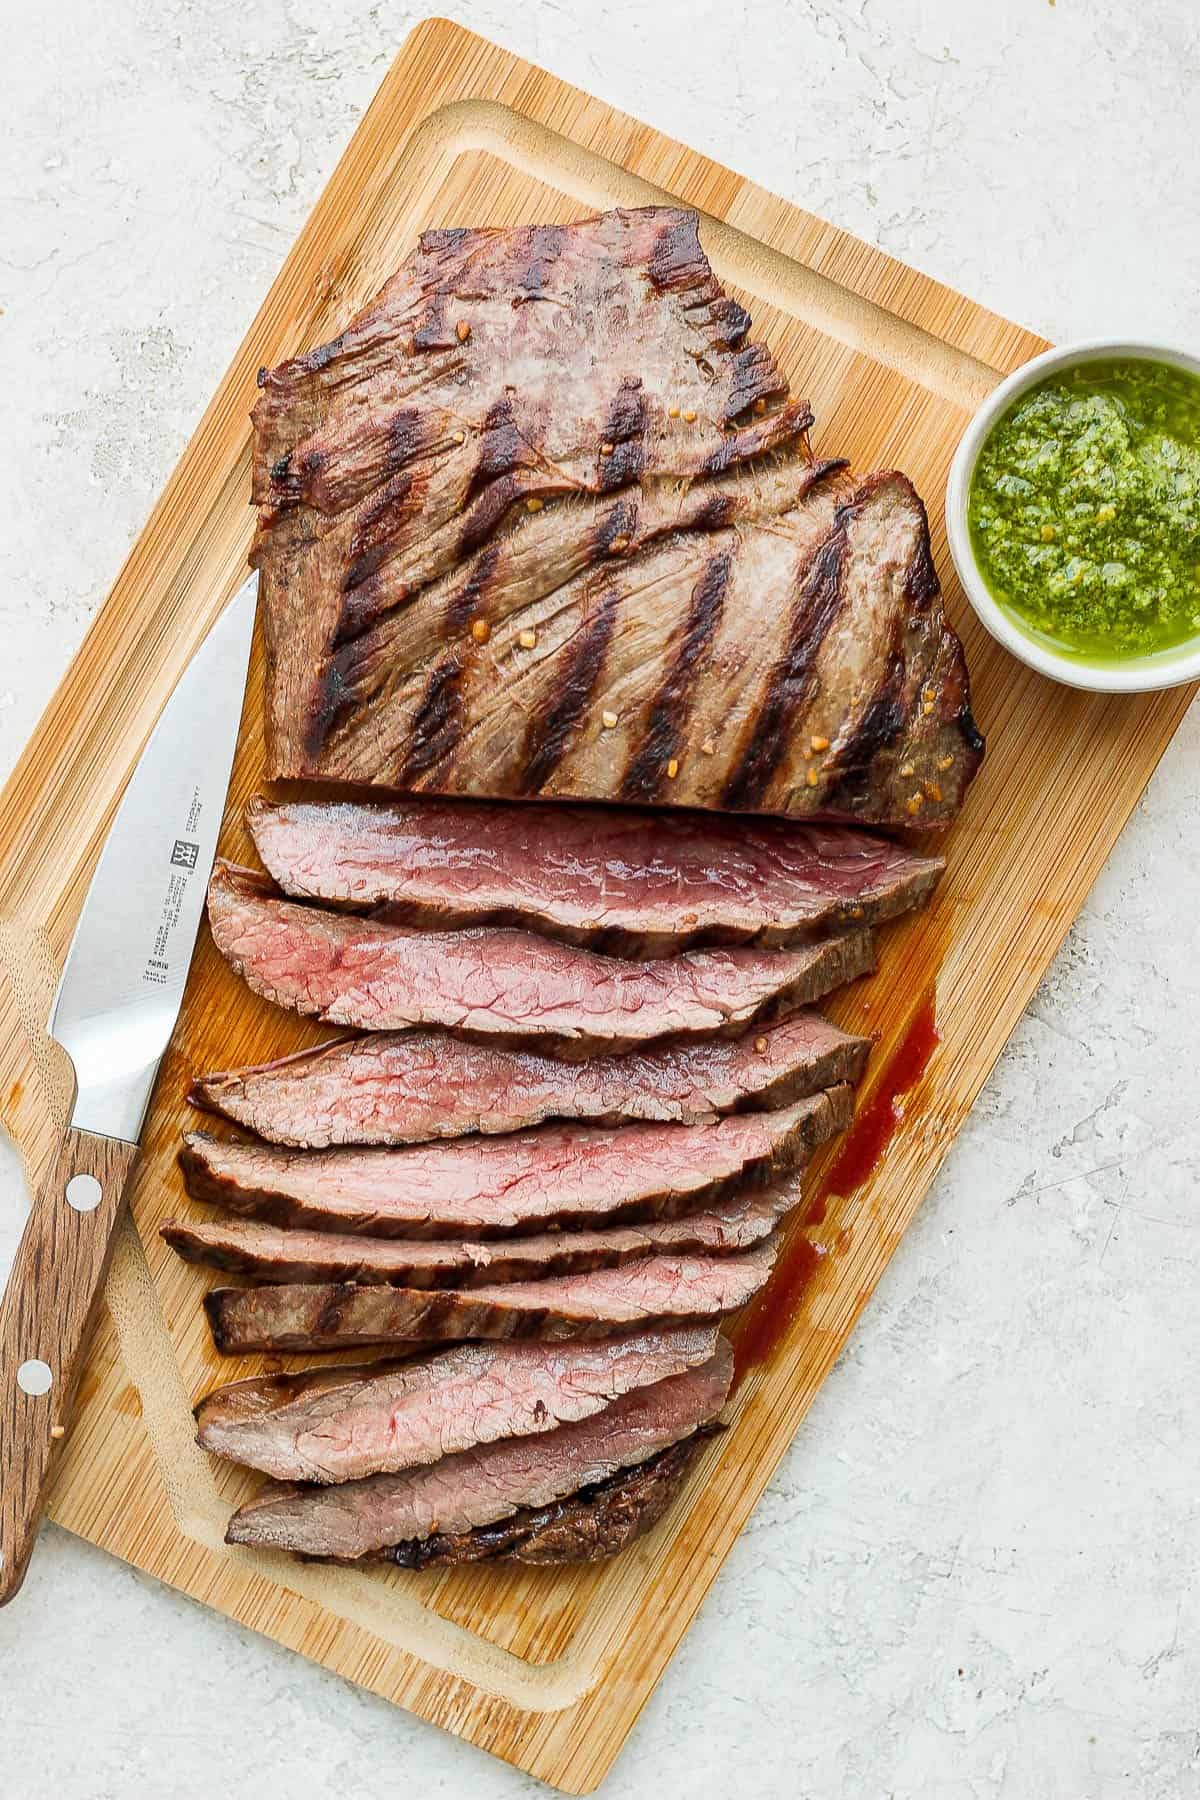 A grilled flank steak resting on a cutting board.